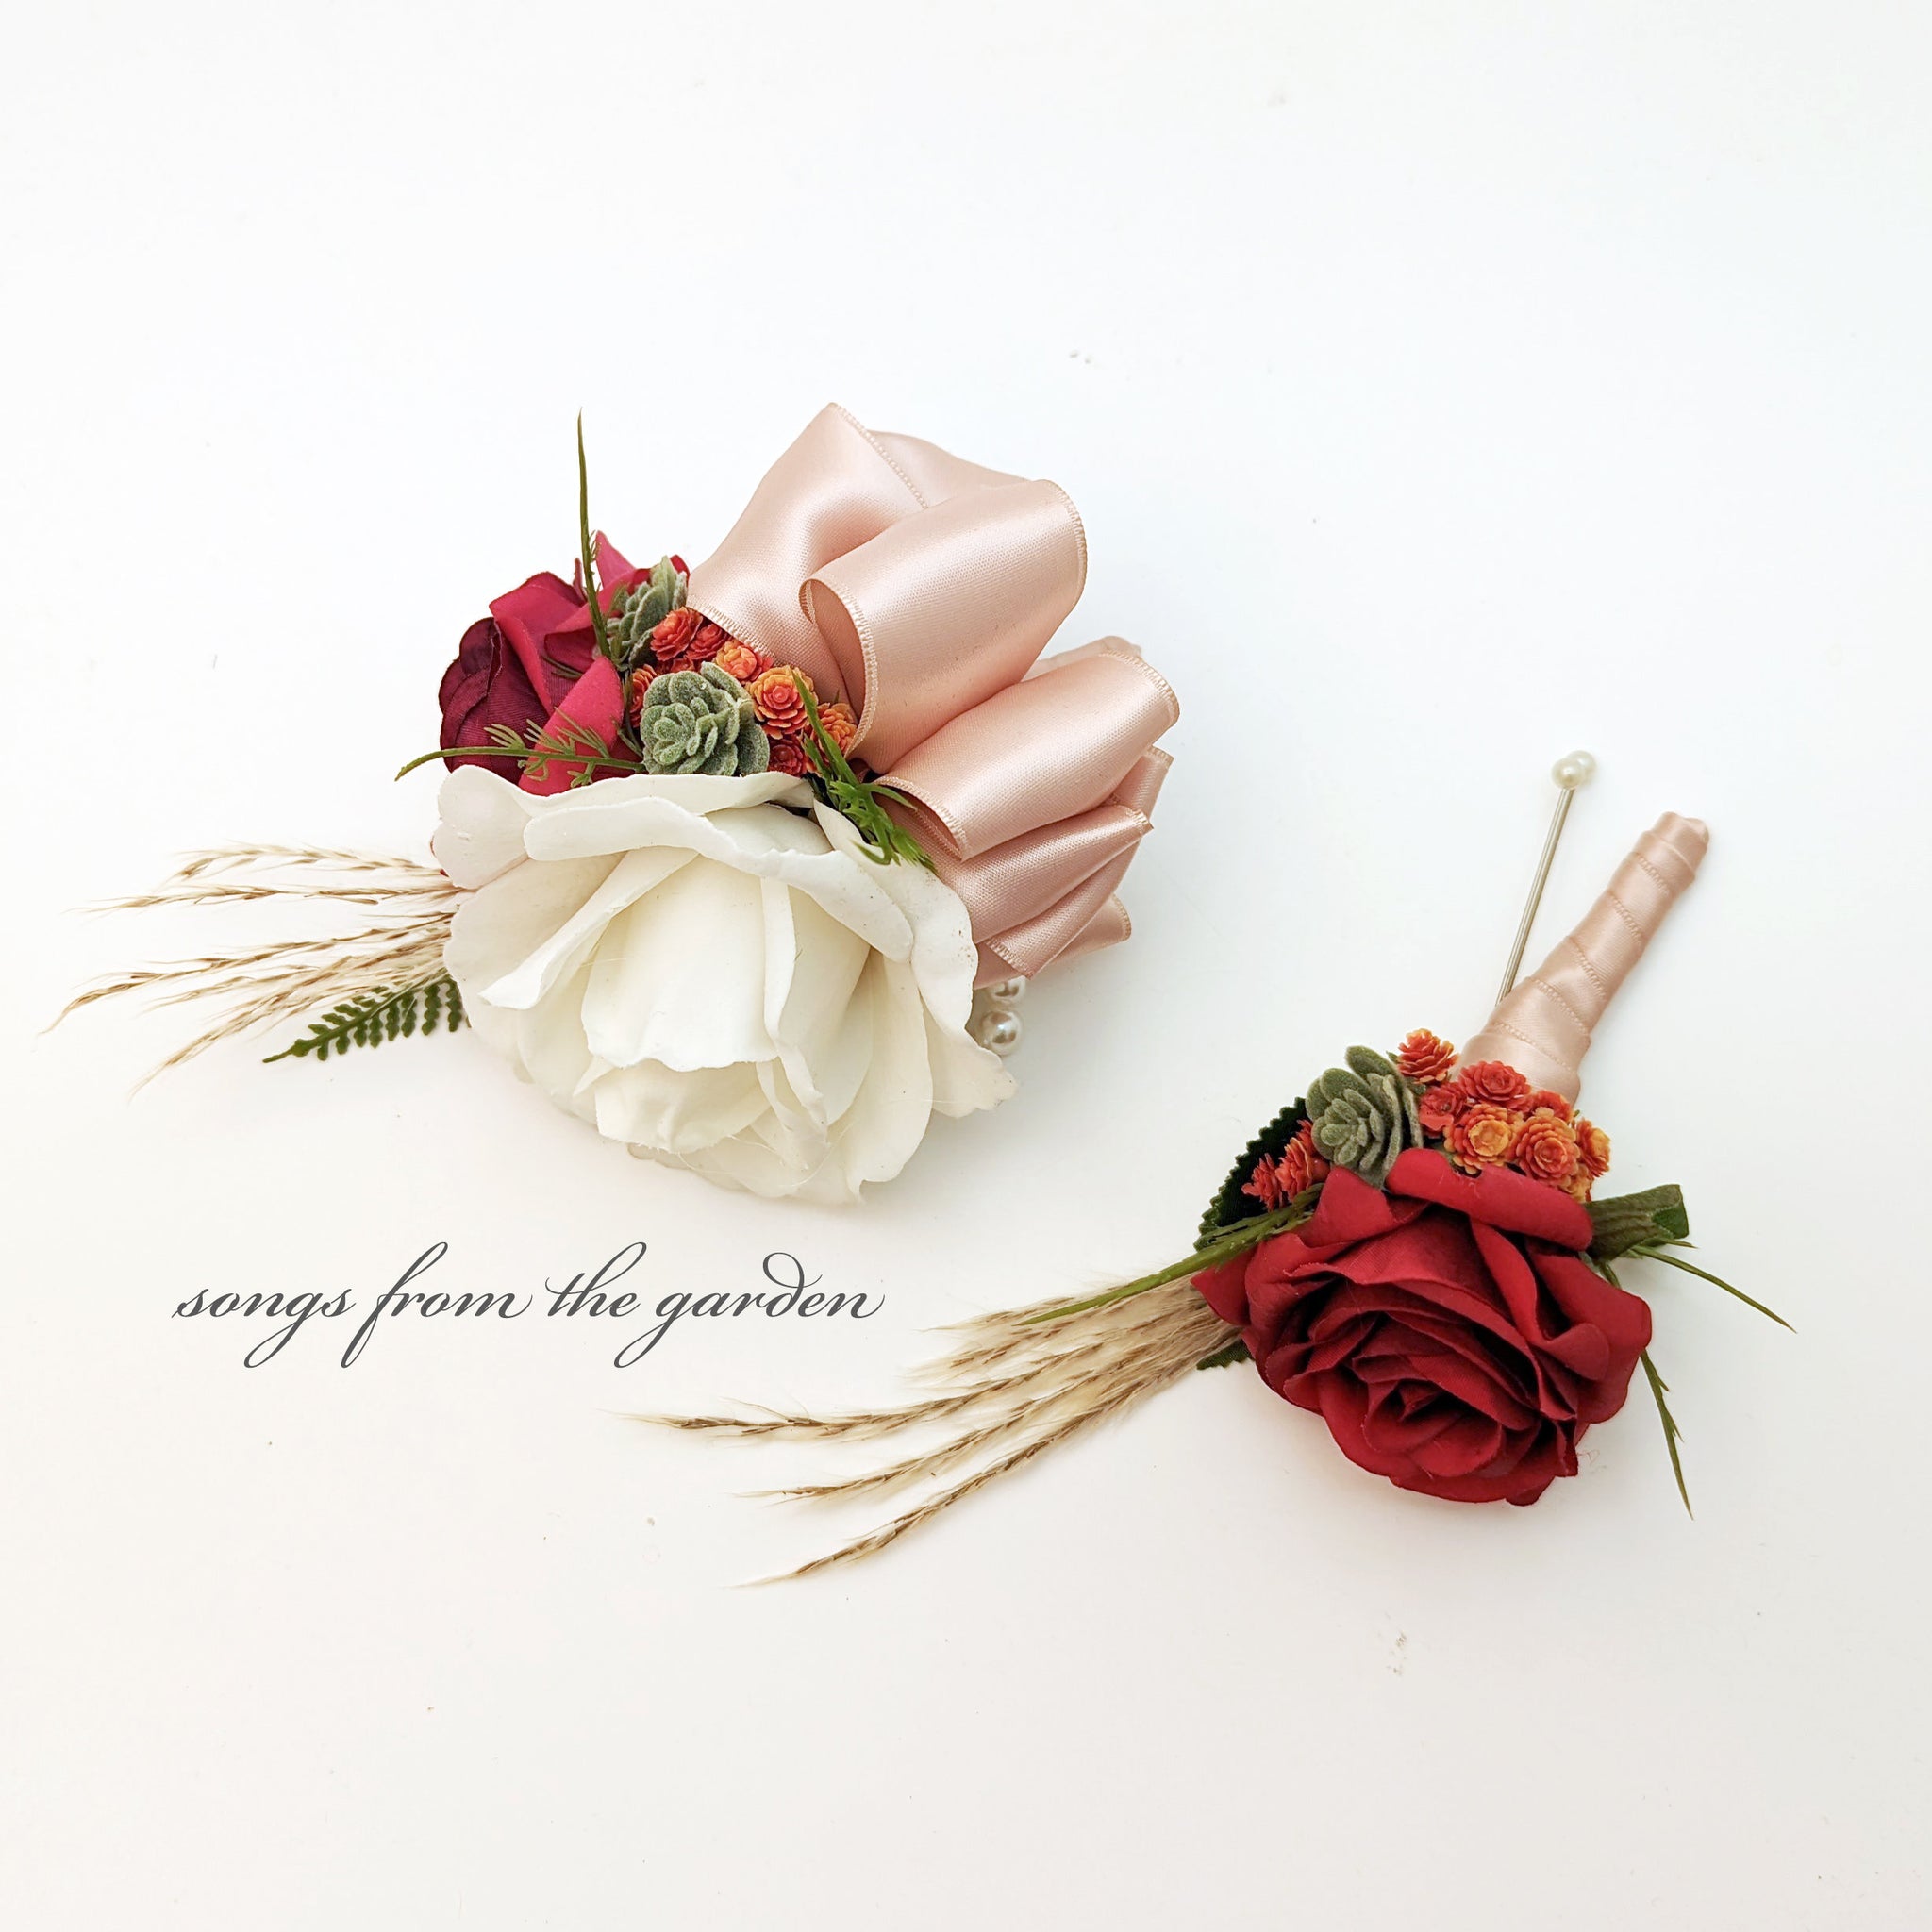 Rose Corsage or Boutionniere with Pampas Grass Succulents Orange Red - Real Touch Rose Wedding Boutonniere Corsage Homecoming Prom Corsage